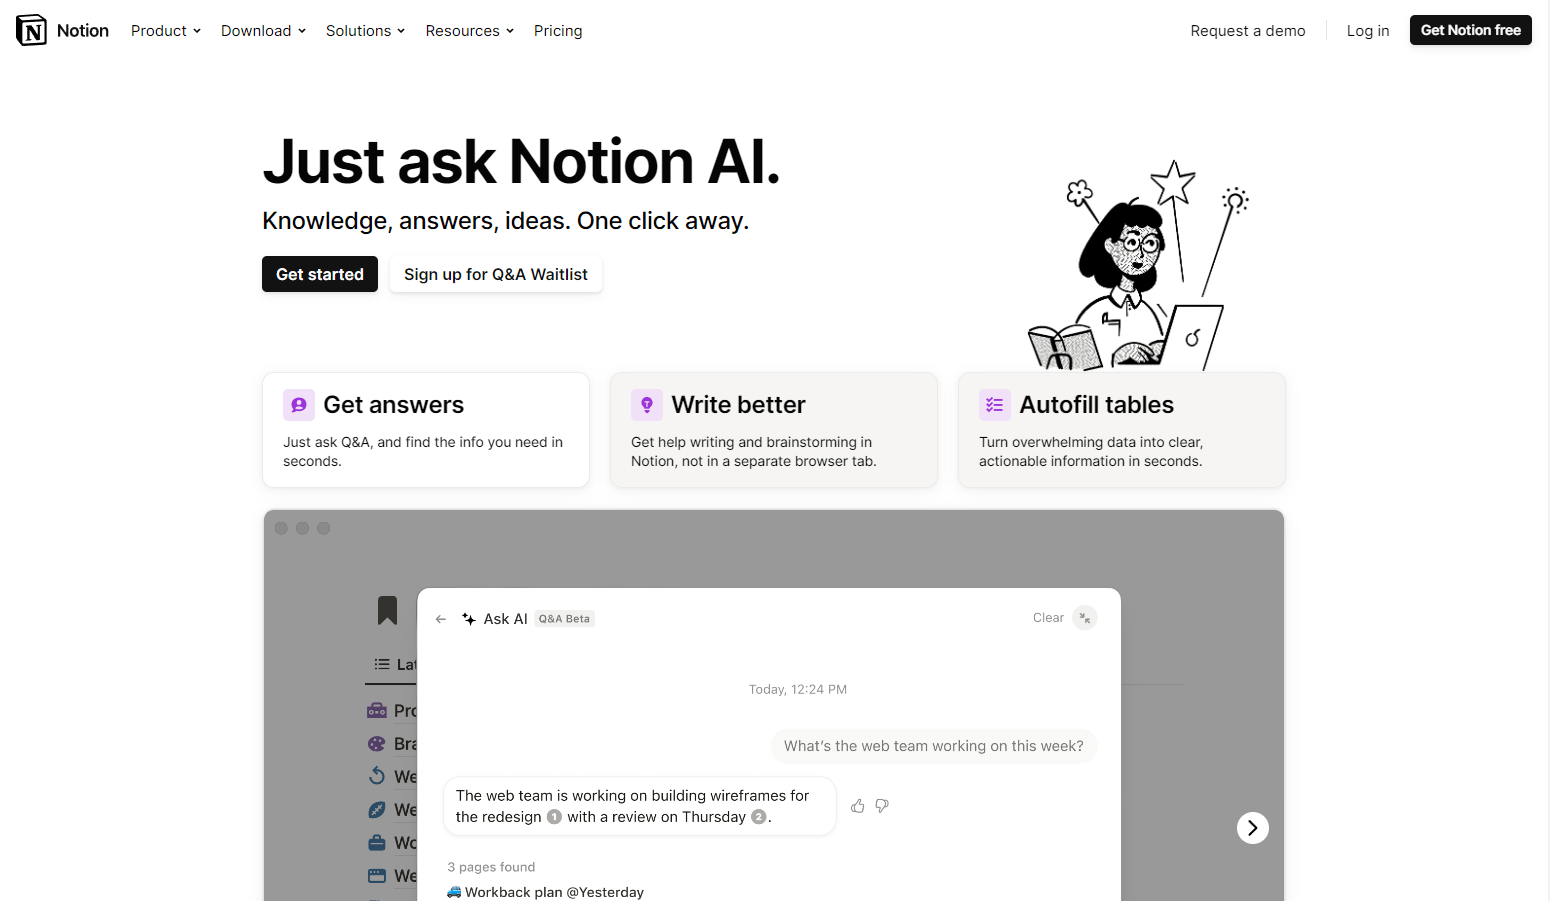 Notion’s AI can brainstorm ideas, write all kinds of content, and summarize your workspace